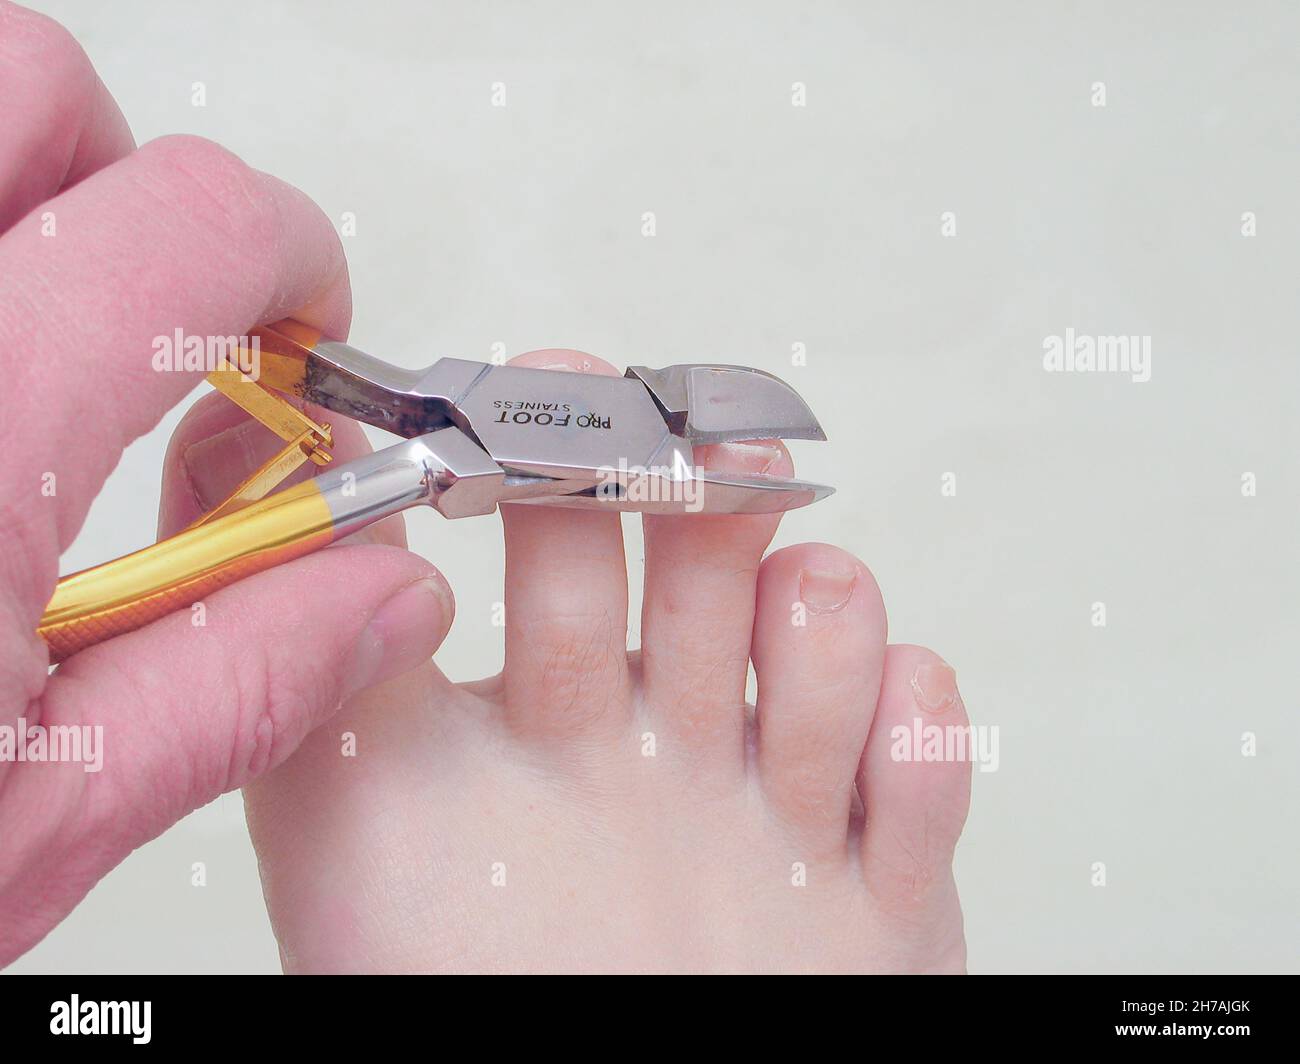 Toenail clippers in use. Stock Photo